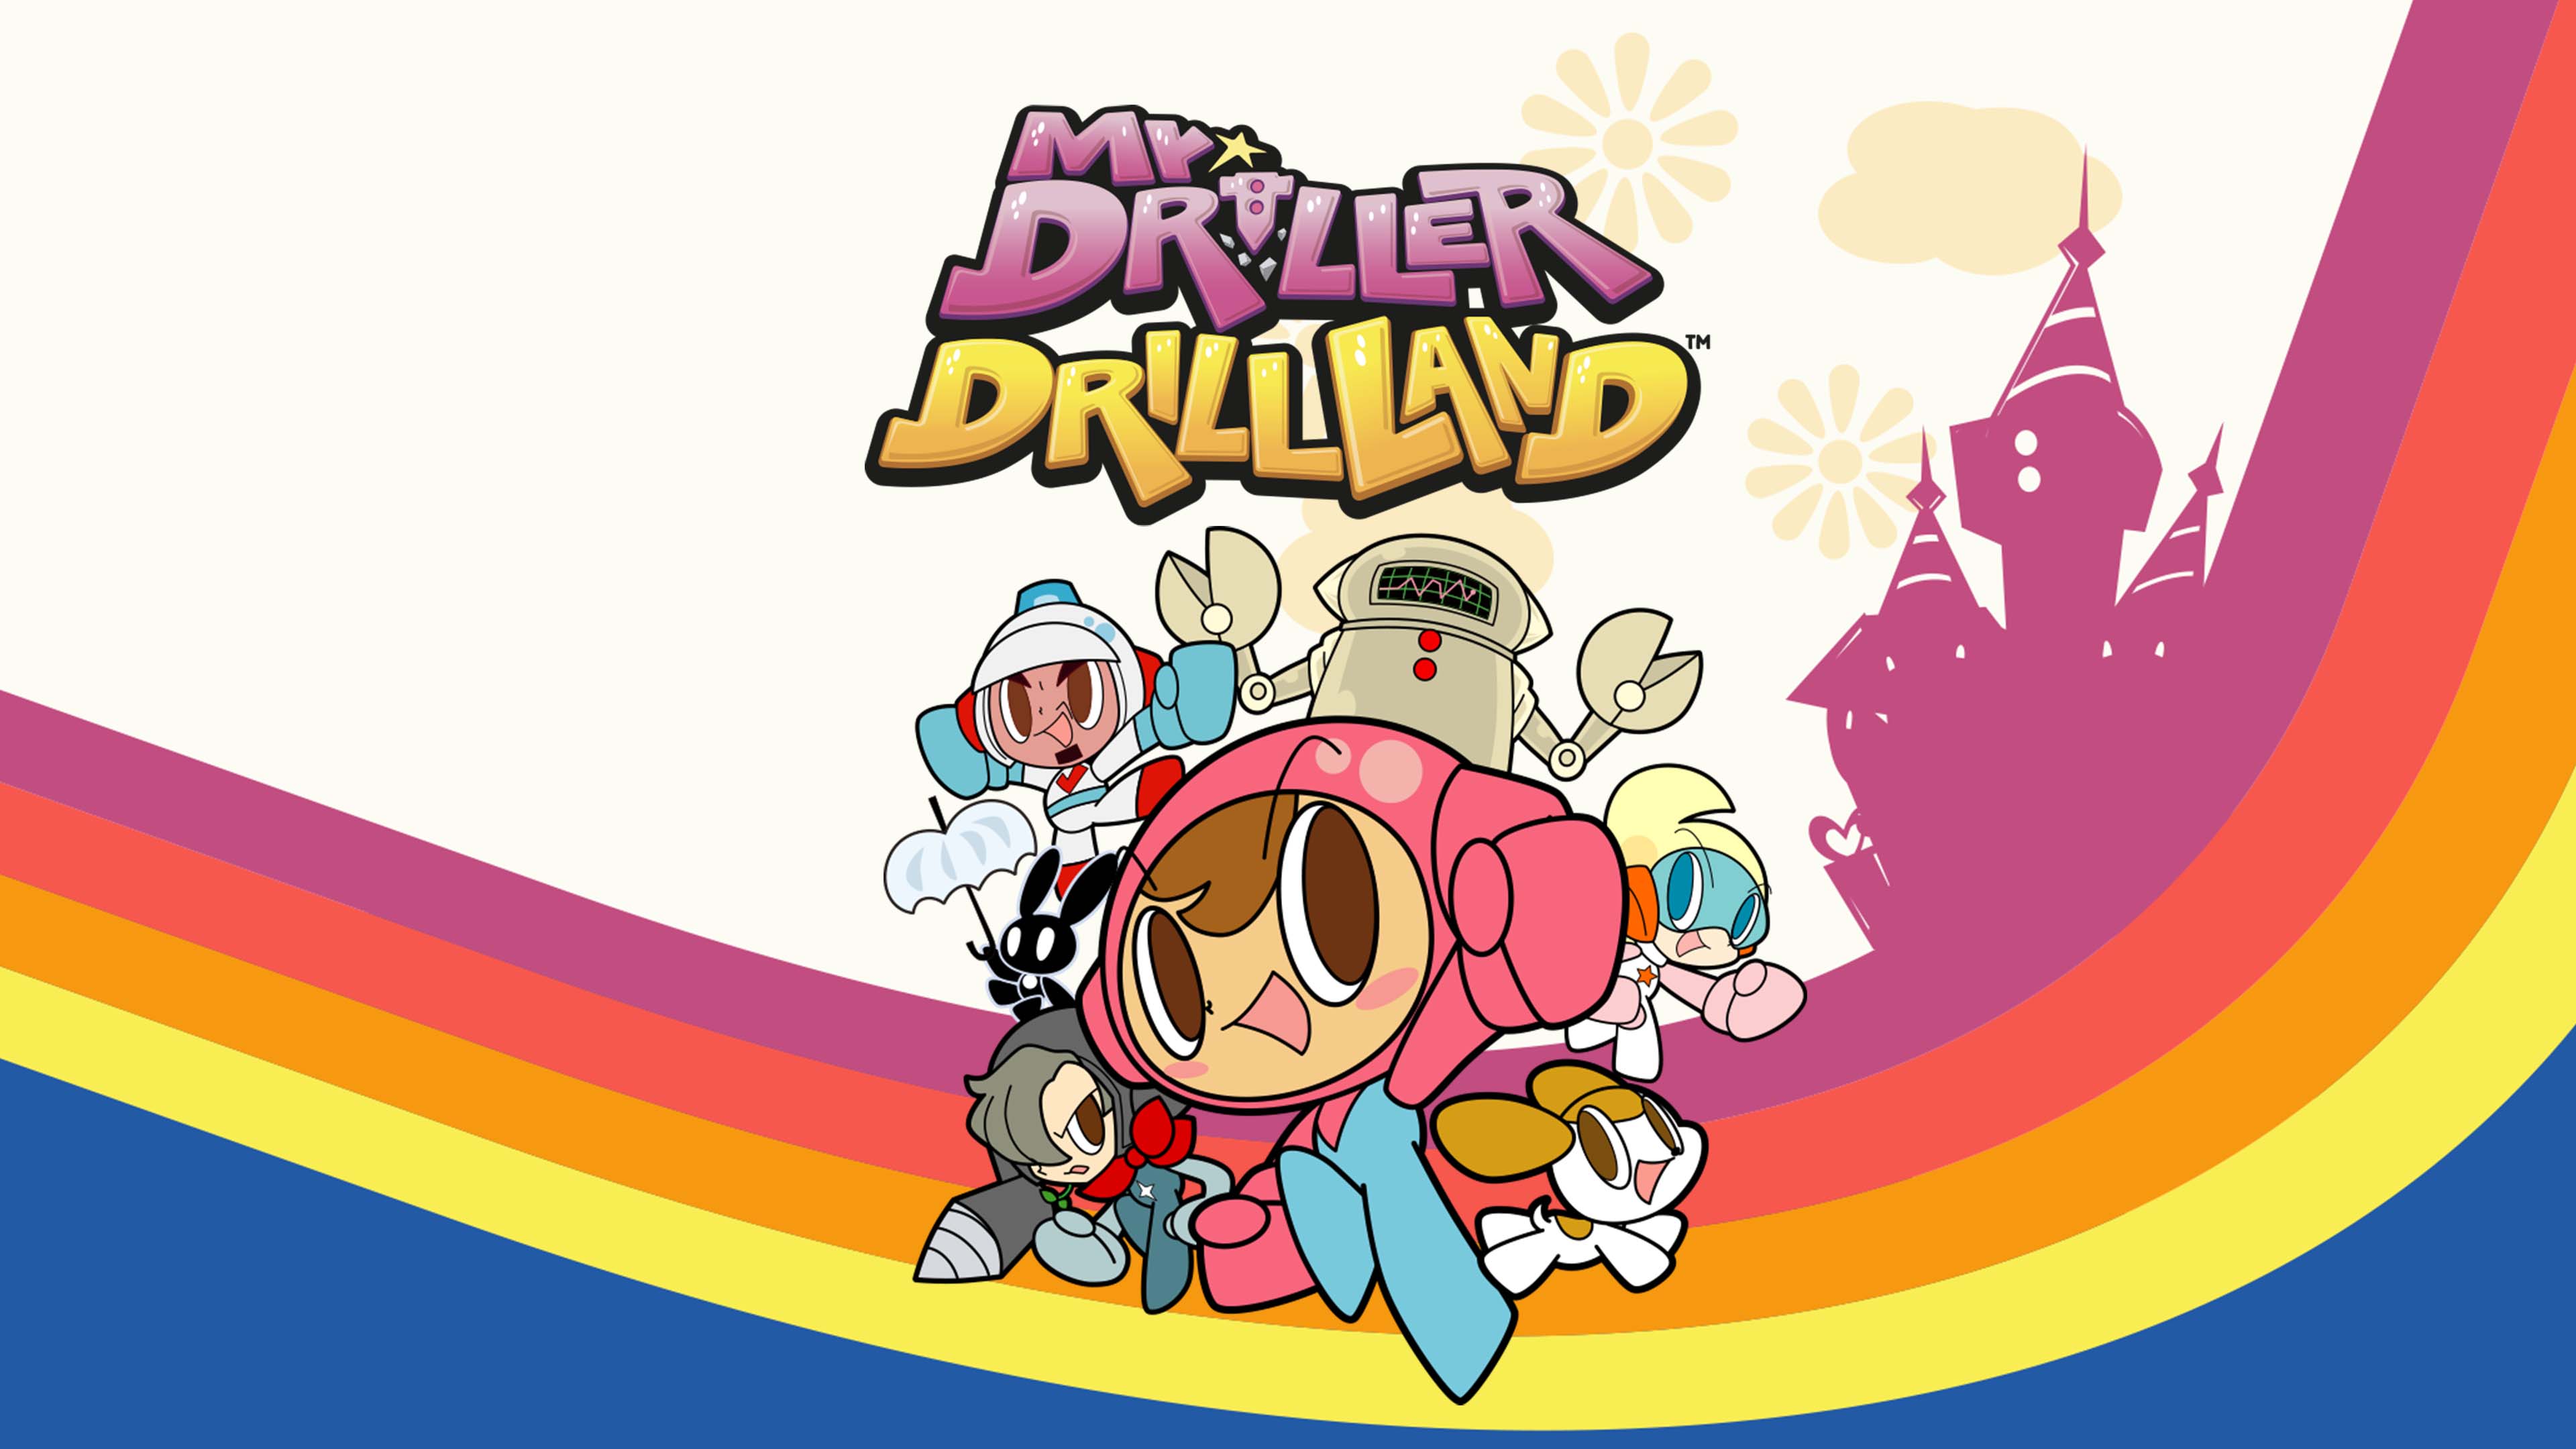 Mr. DRILLER DrillLand PS4 & PS5